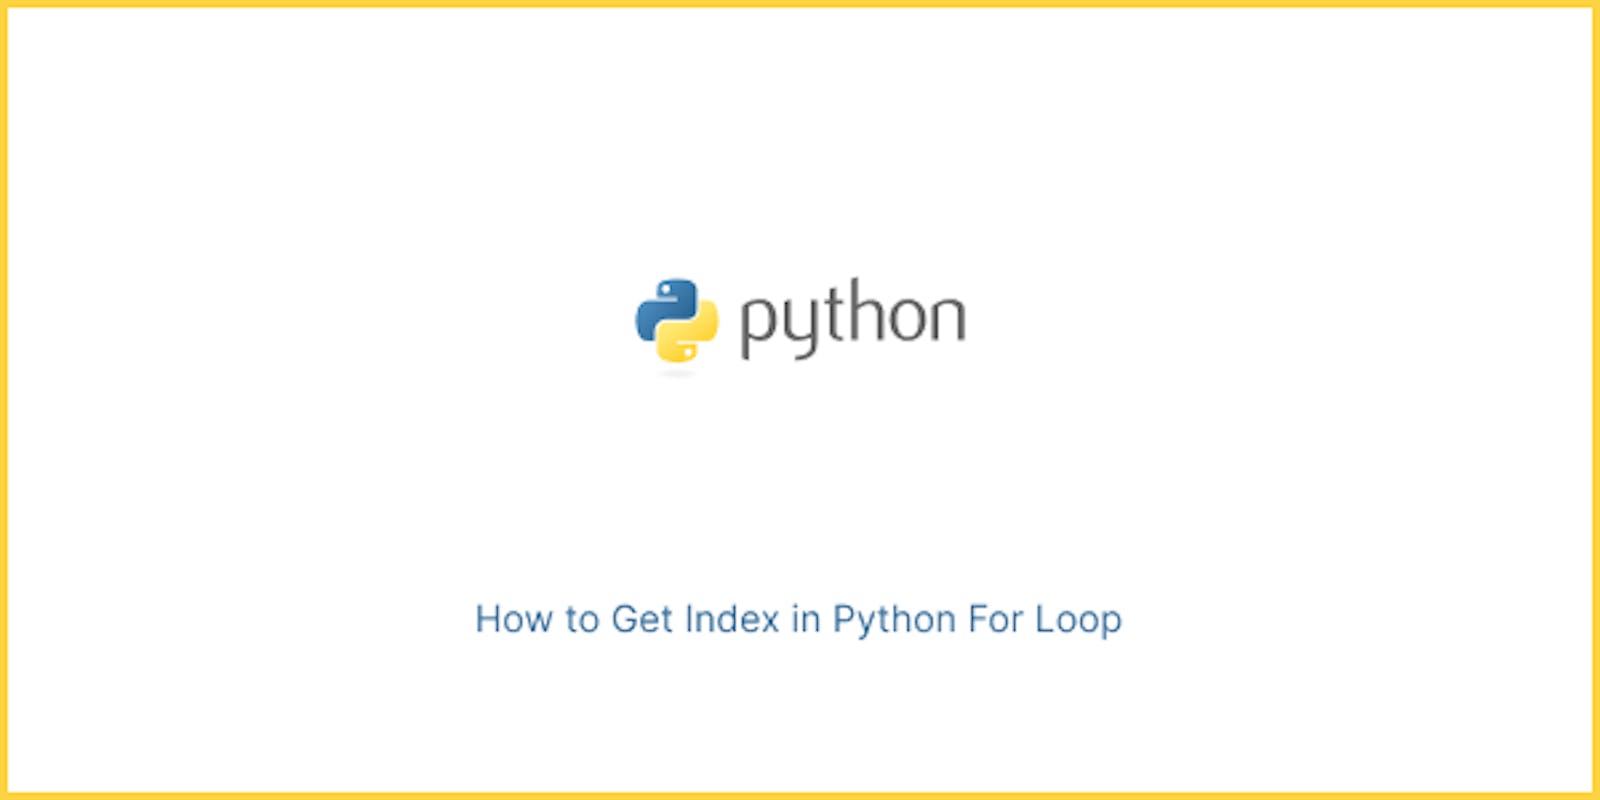 How to Get Index in Python For Loop